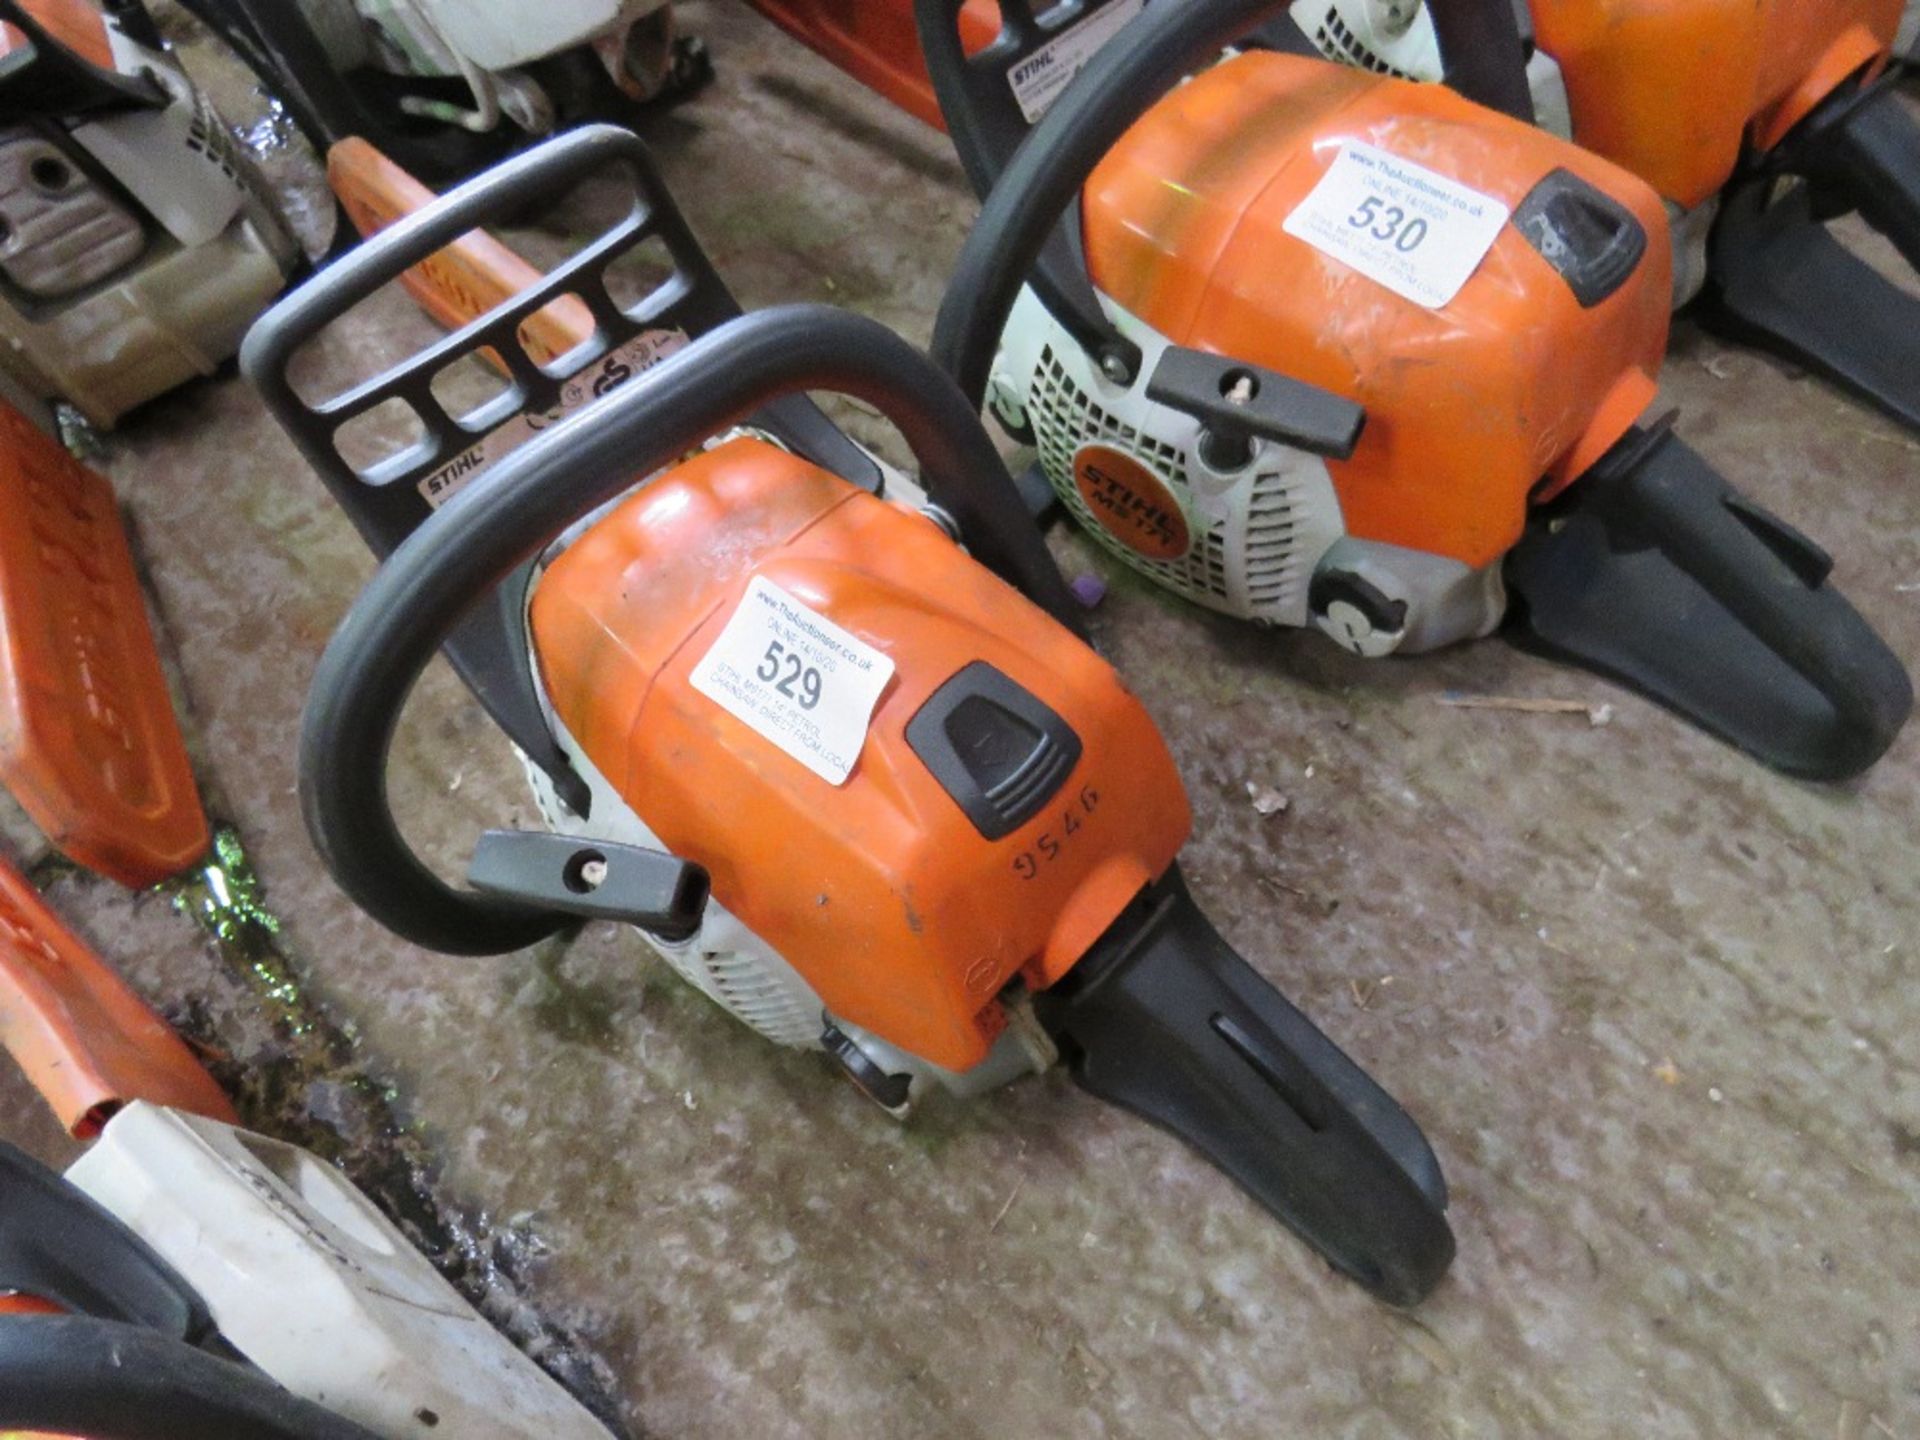 STIHL MS171 14" PETROL CHAINSAW. DIRECT FROM LOCAL COMPANY AS PART OF THEIR ONGOING FLEET MANAGEMENT